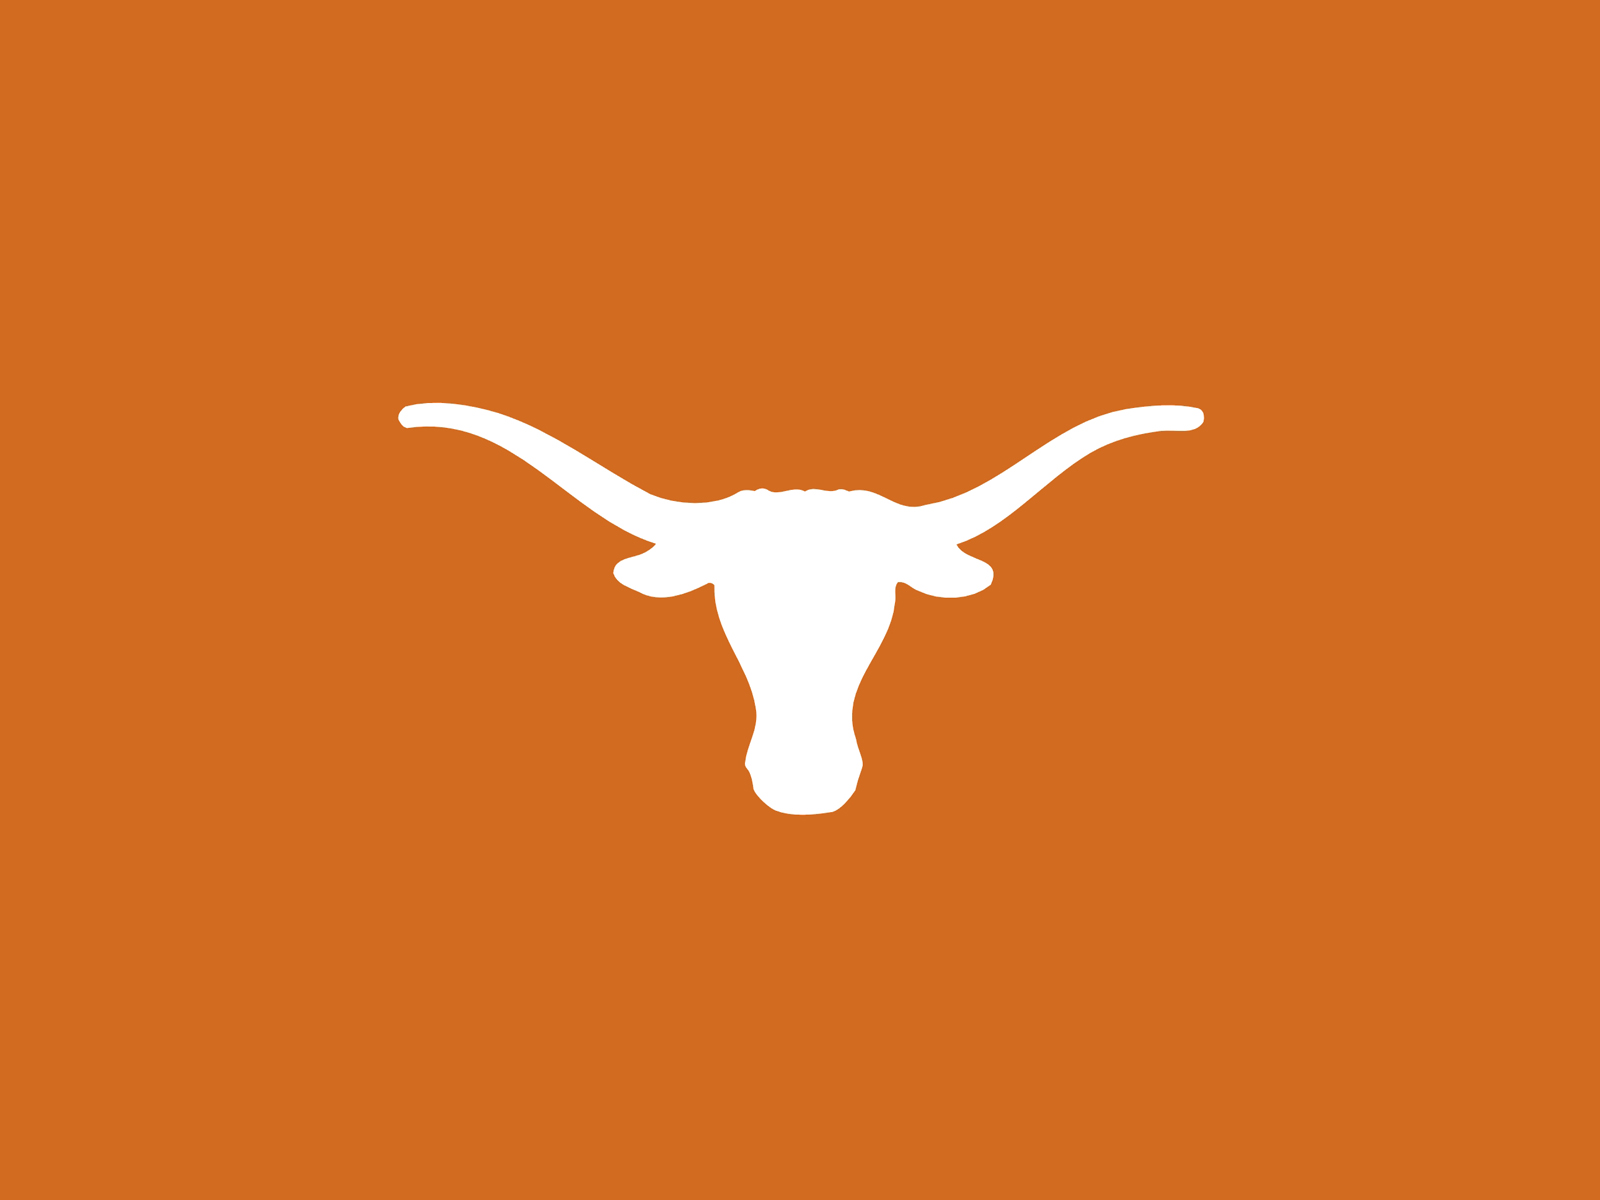 HD Wallpaper Archived 1080p Texas Football